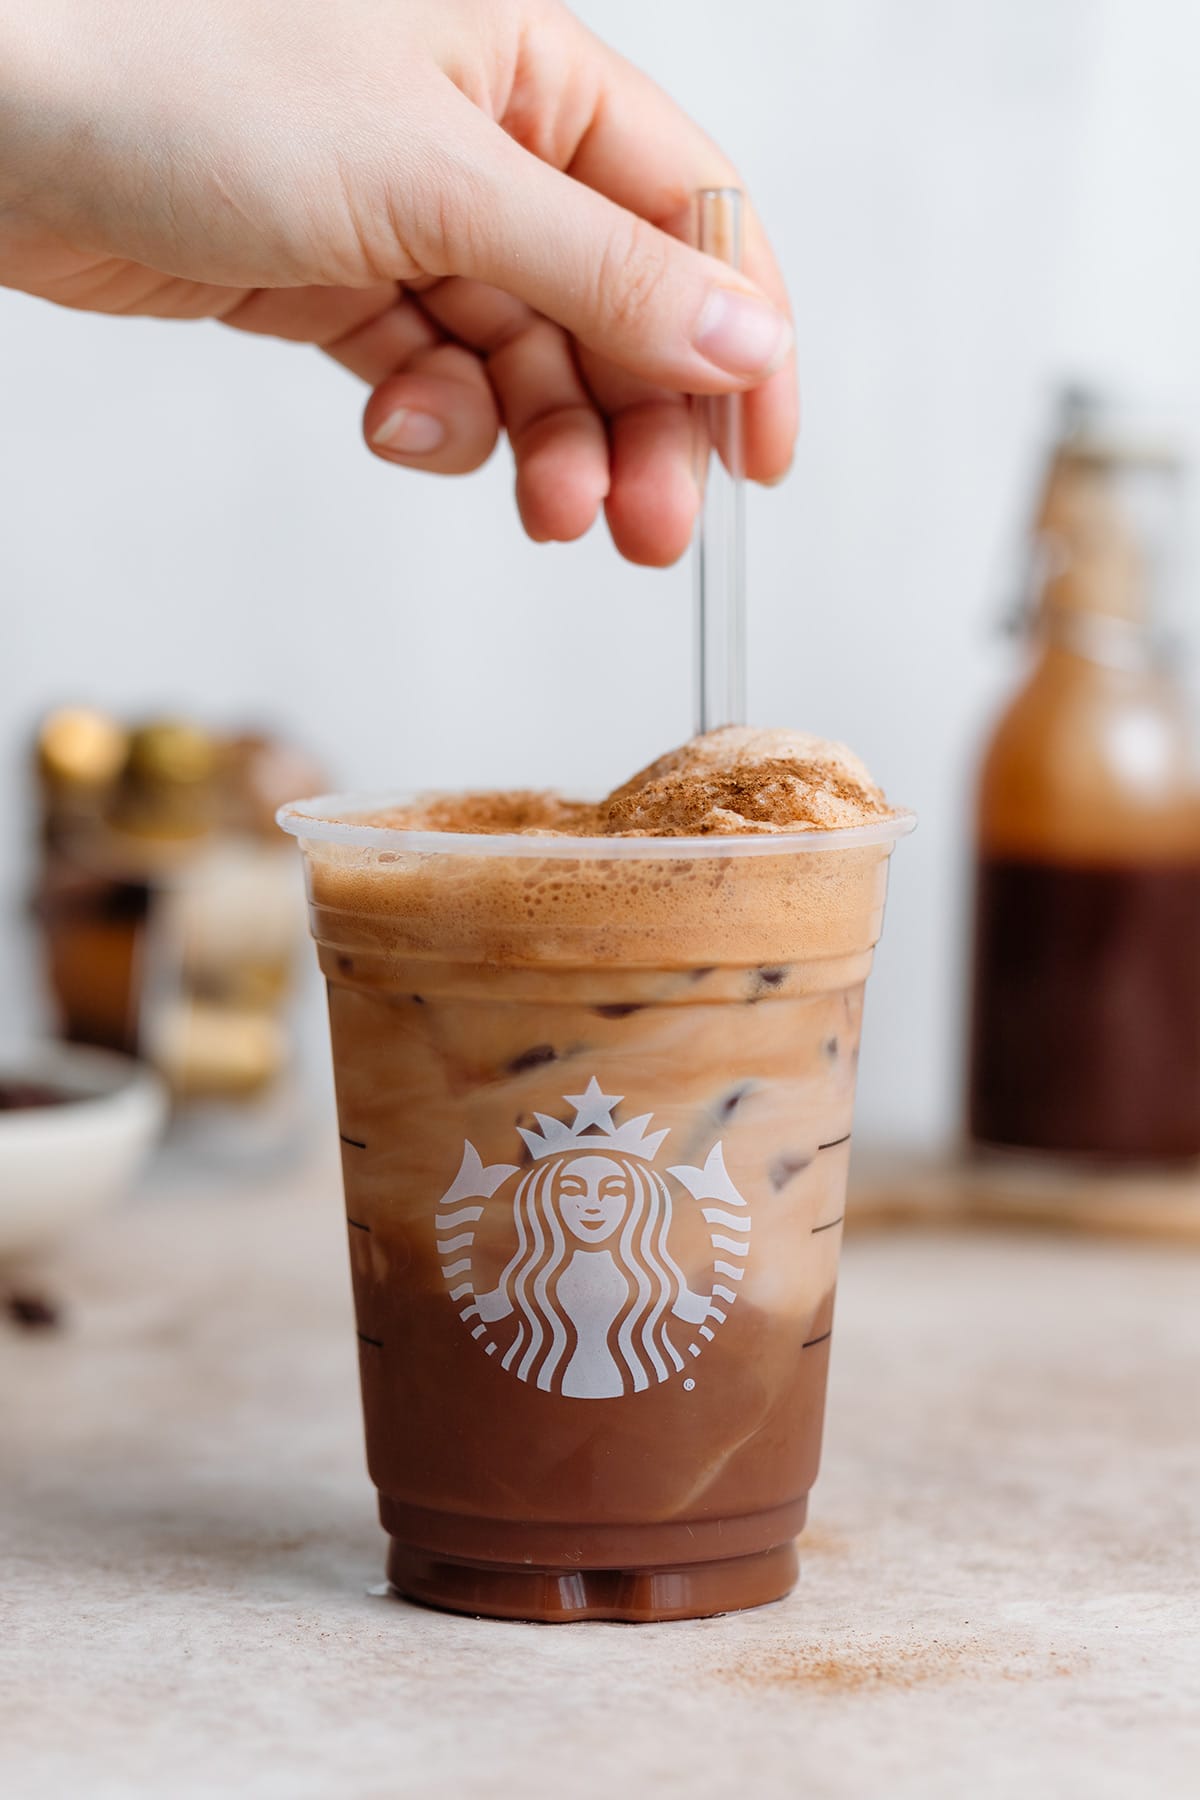 A hand stirring frothy shaken espresso in a plastic Starbucks cup with a glass straw.